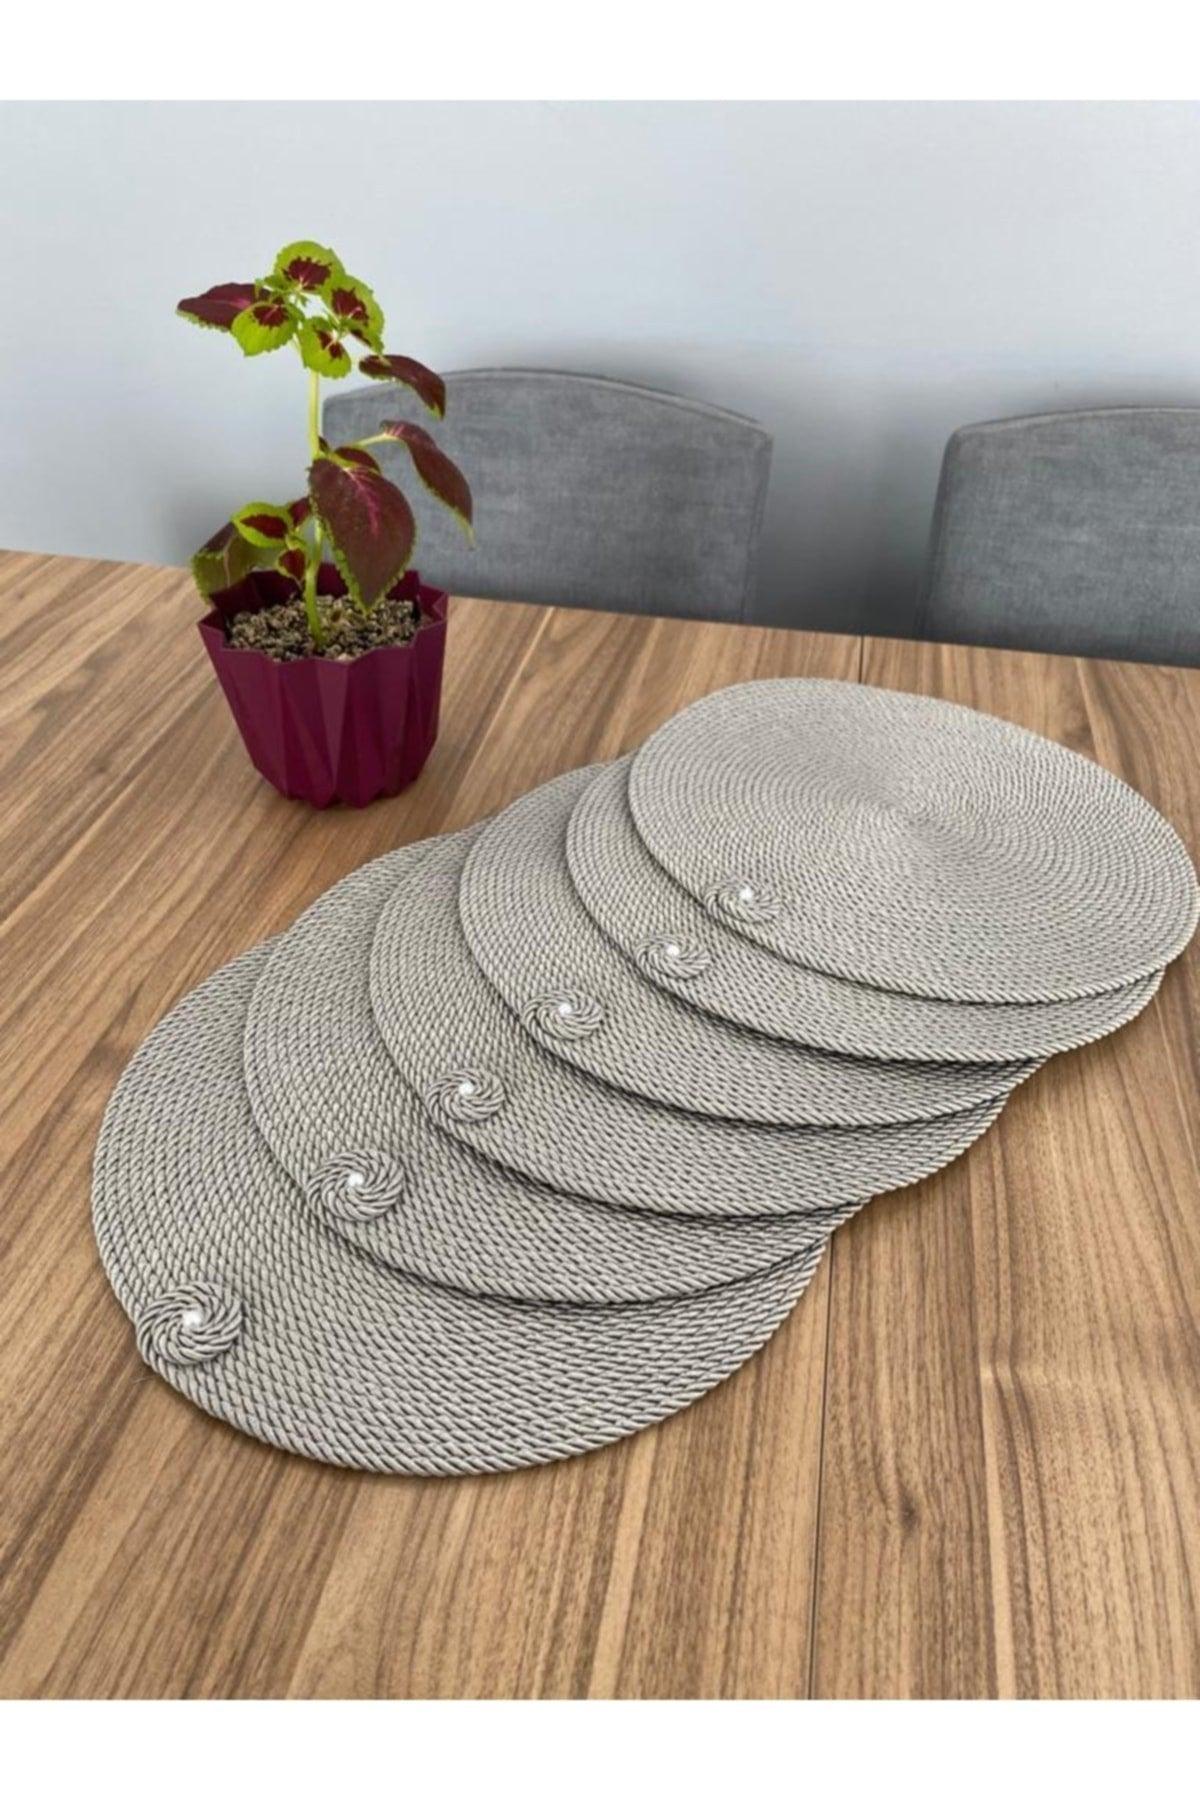 Placemat Runner 6 Pieces Gray Straw Cord Supla Knitted Dowery Set Plate Pot Bottom Fireproof - Swordslife